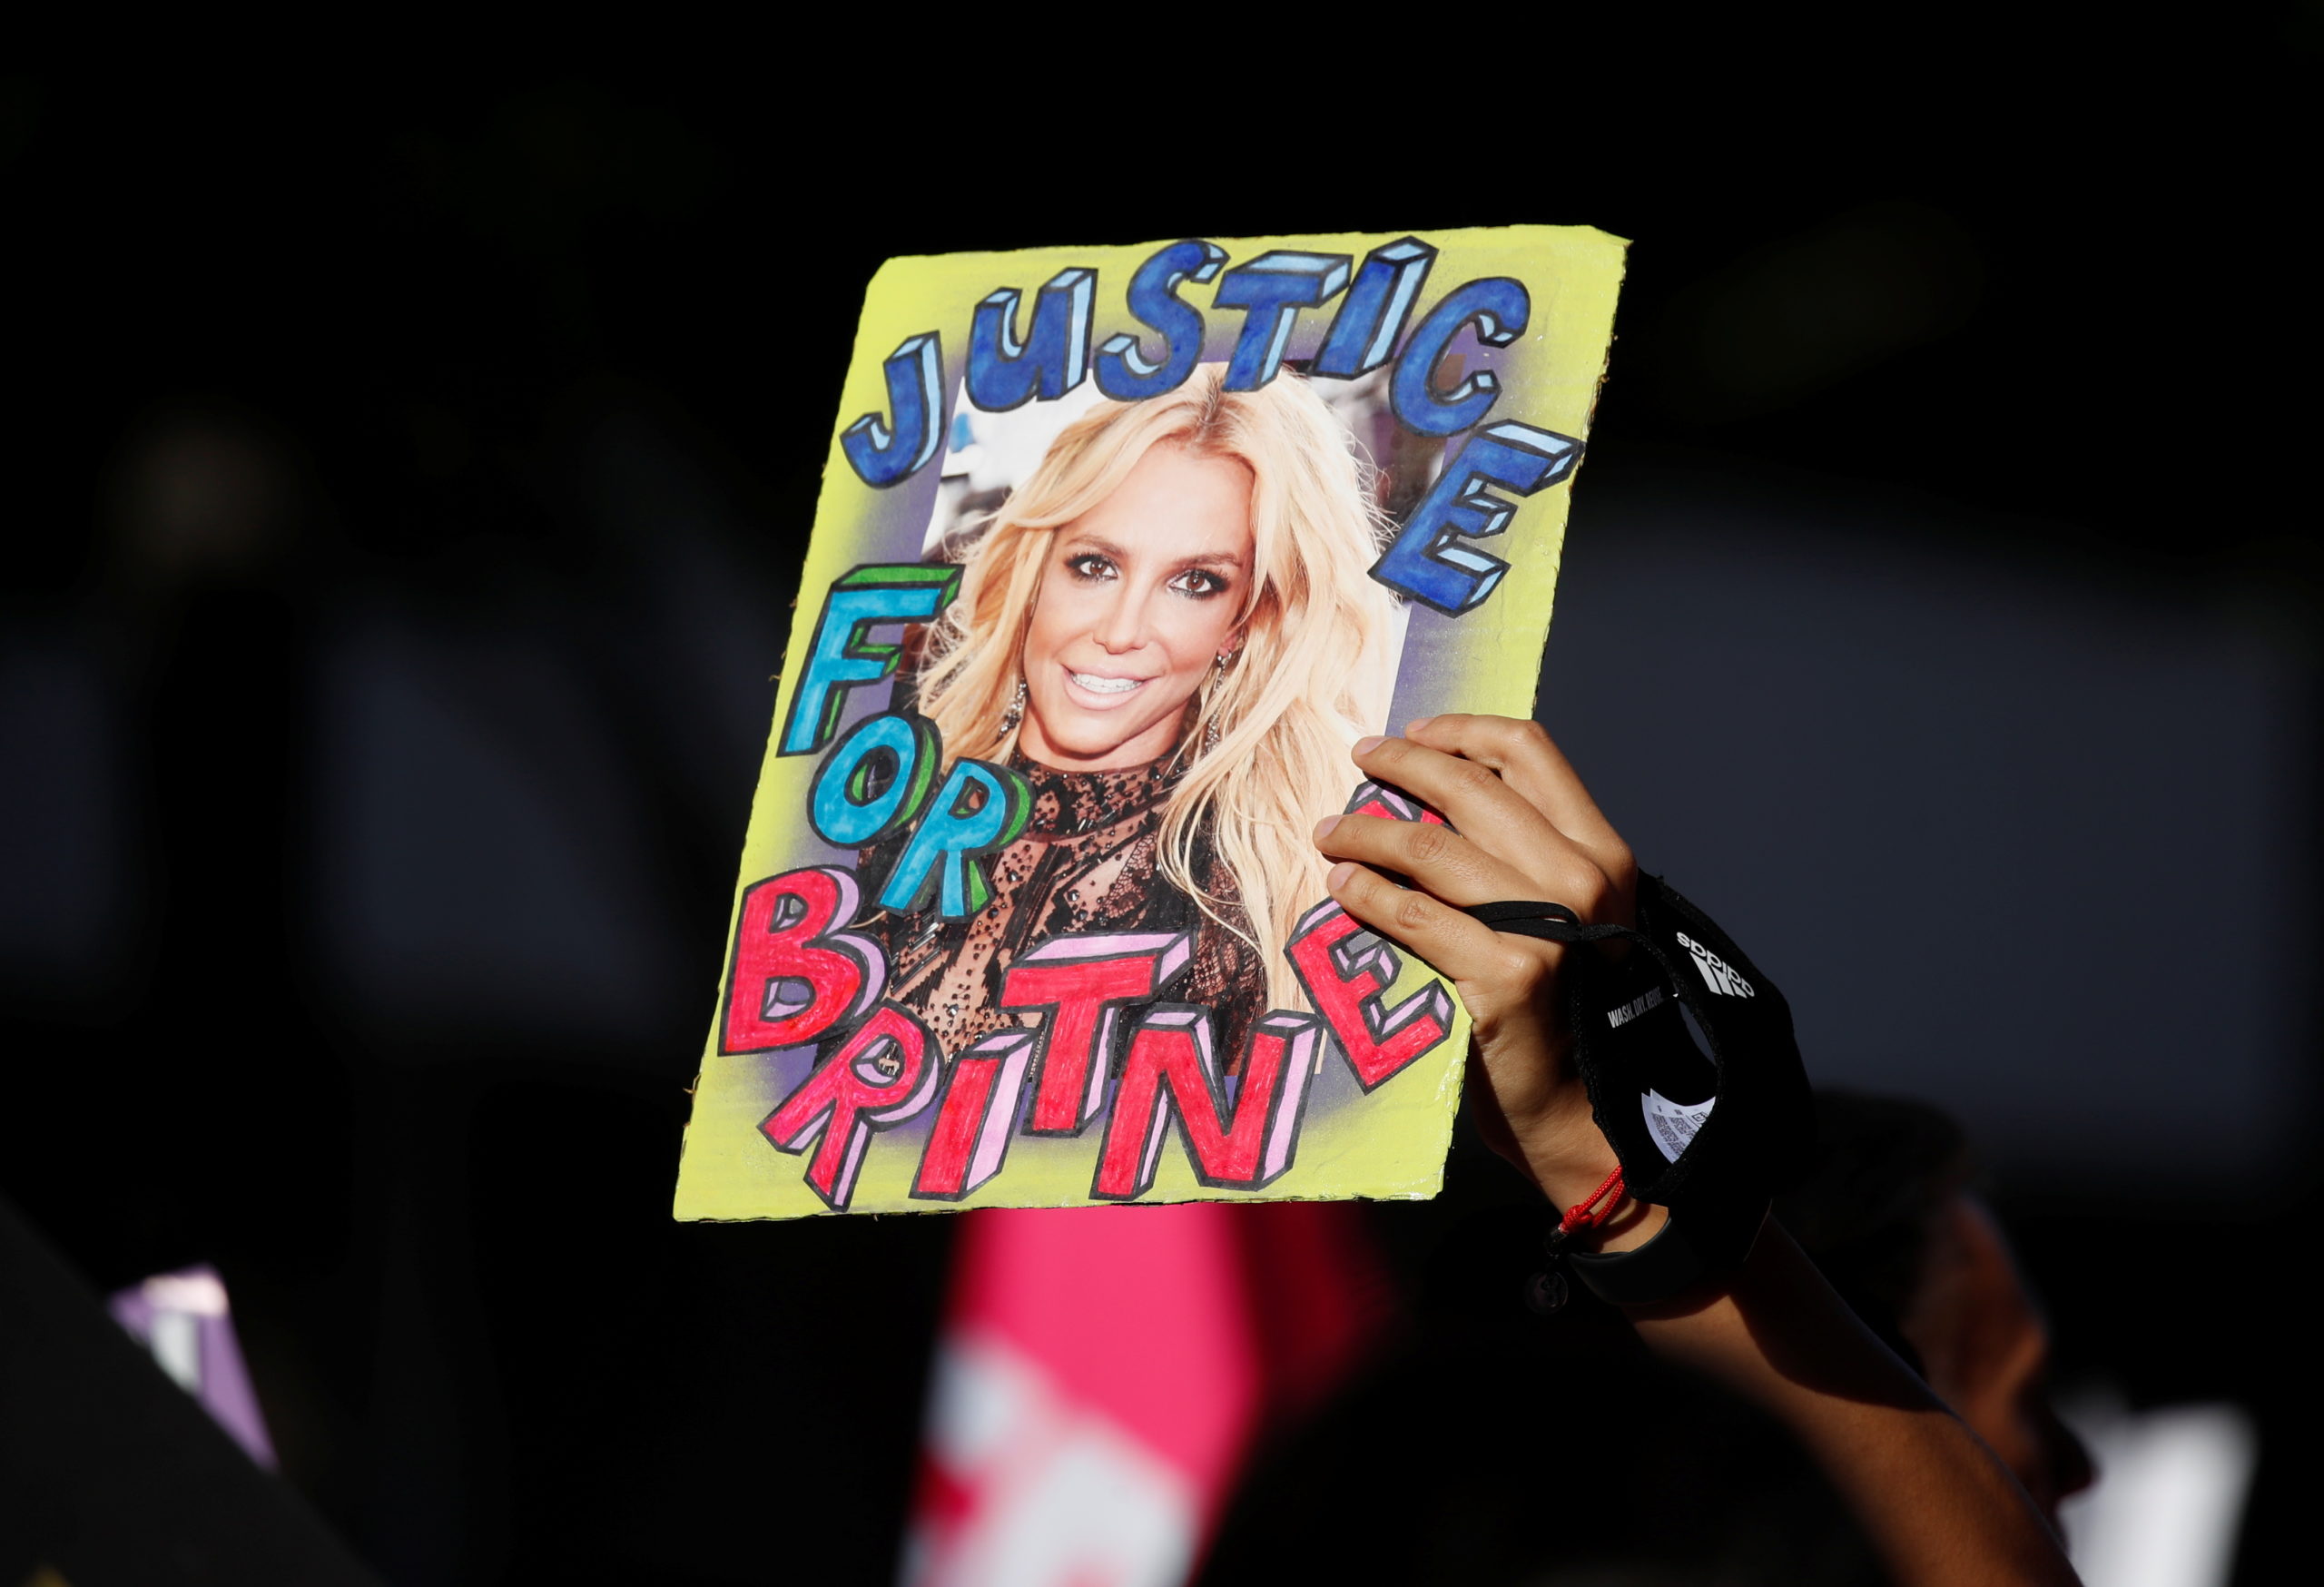 A supporter of singer Britney Spears holds up a picture of the pop star with the words "Justice for Britney" during celebrations for the termination of her conservatorship, outside the Stanley Mosk Courthouse in Los Angeles, California, U.S. November 12, 2021. REUTERS/Mike Blake